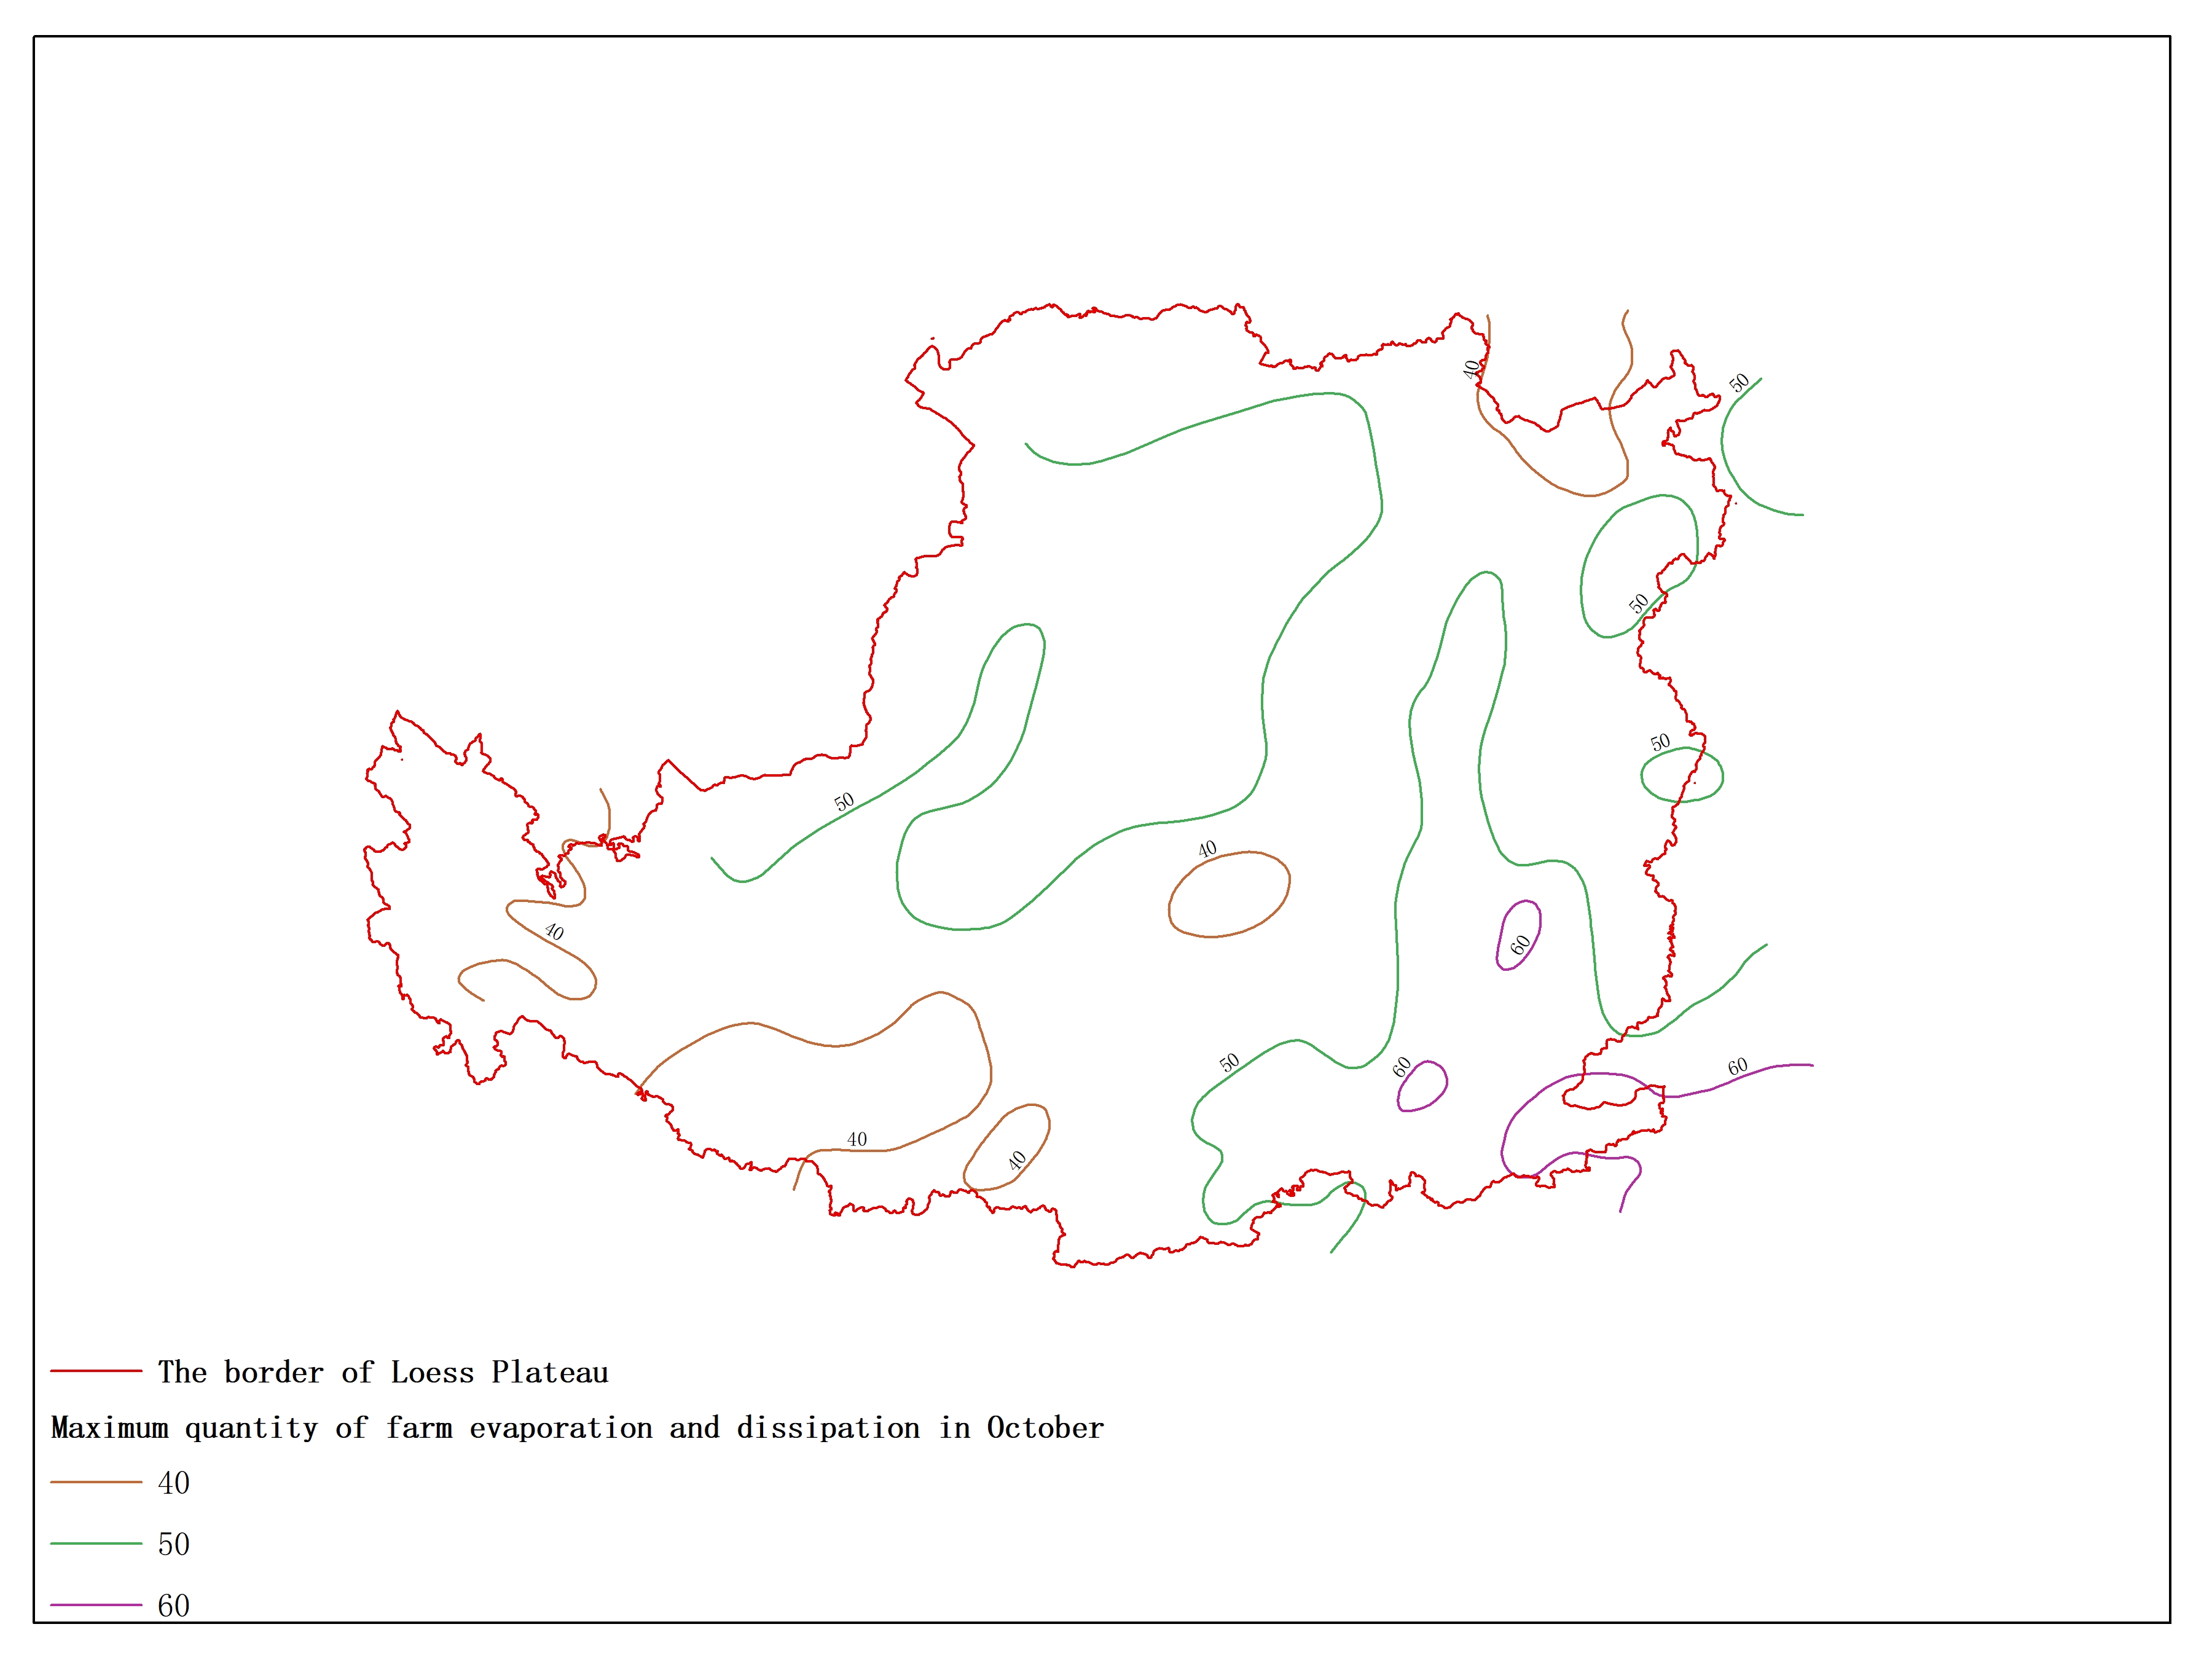 Agricultural climate resource atlas of Loess Plateau-Maximum quantity of farm evaporation and dissipation in October